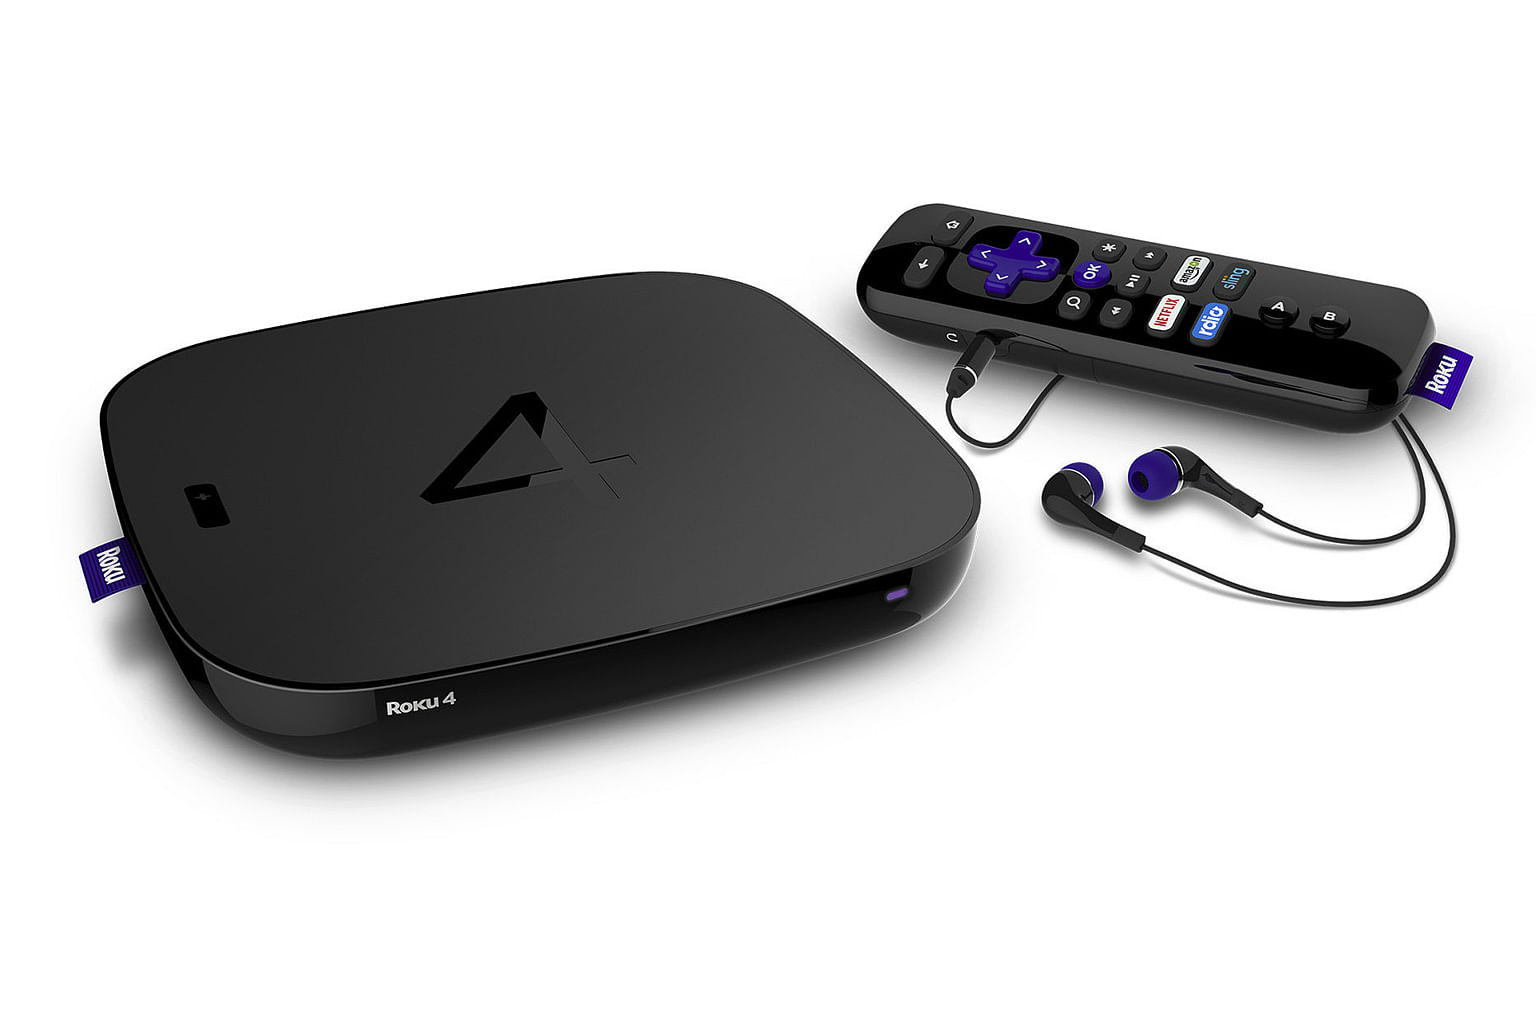 With a VPN, the Roku 4 (above) is probably one of the most mature media streamers around, with more TV-optimised apps than any of its competitors. Its major selling point is its support for 4K content.